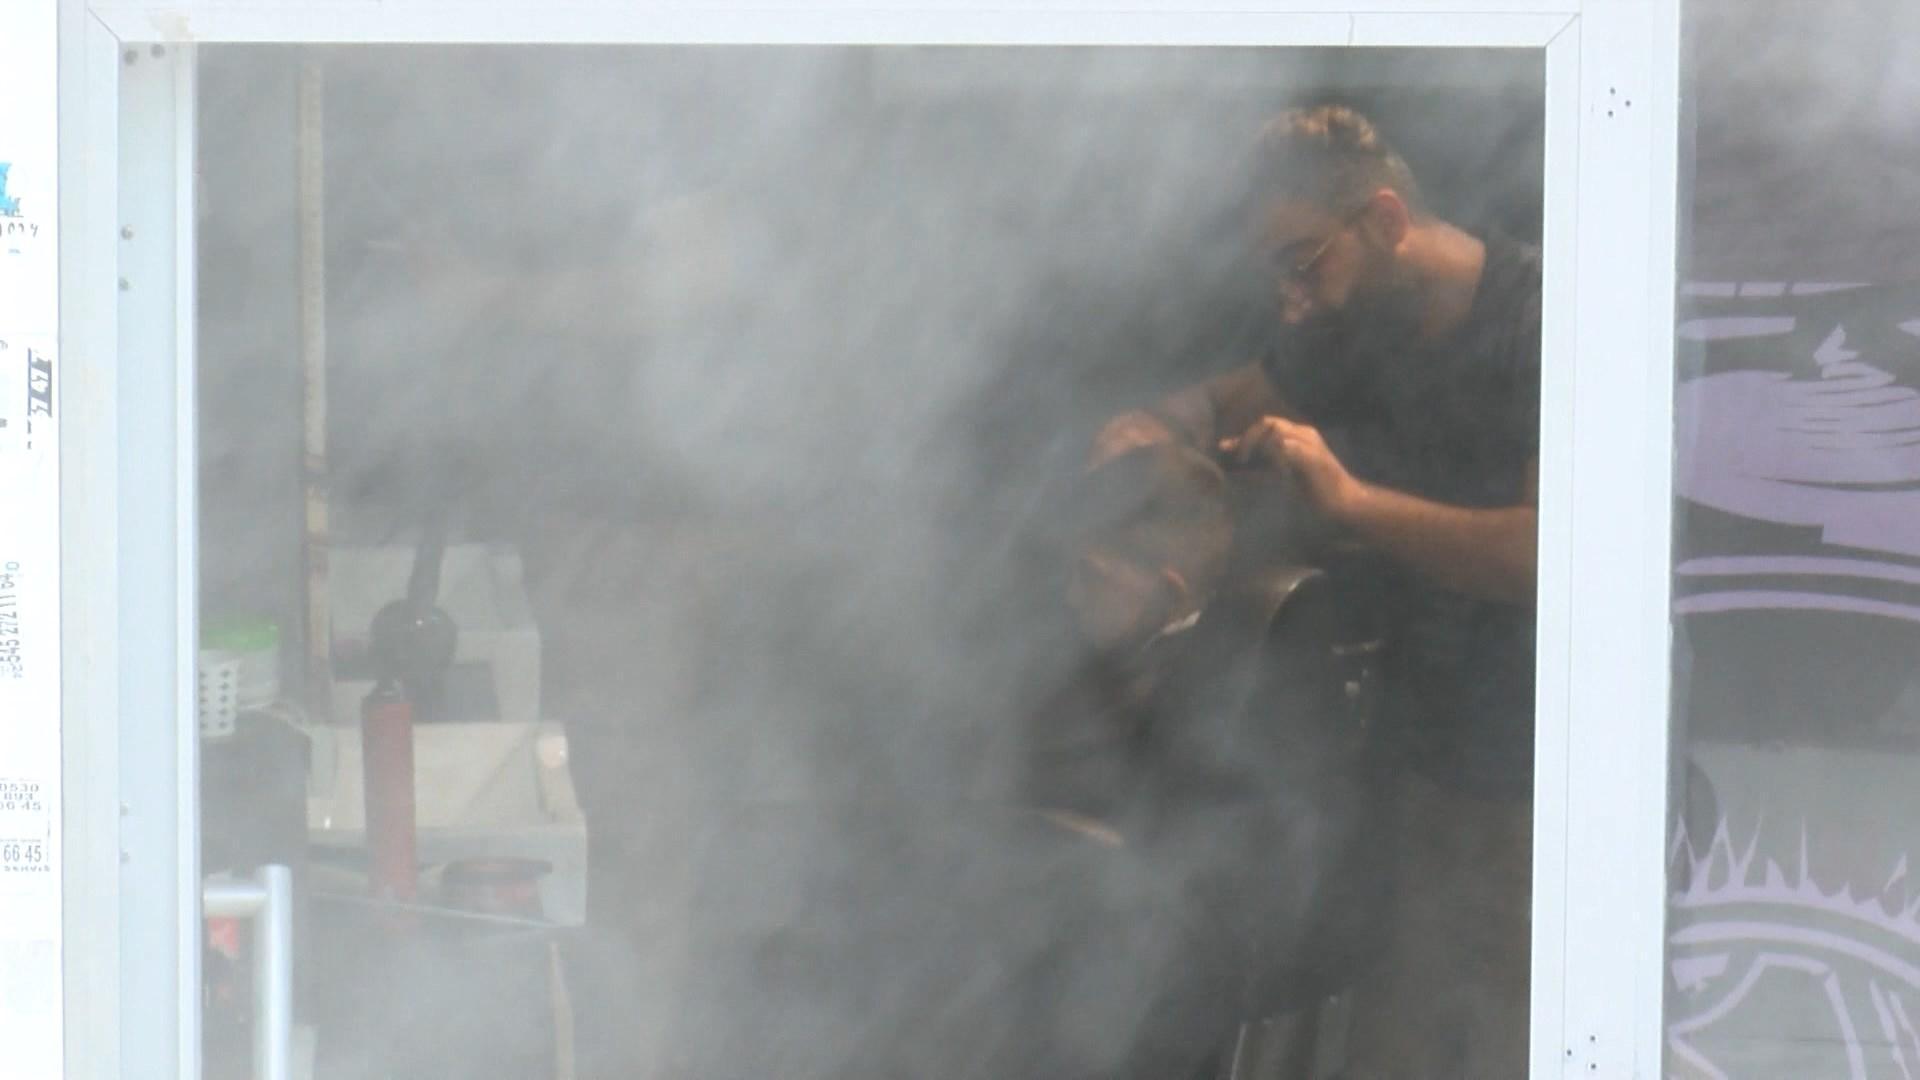 A hairdresser in Istanbul continued cutting hair despite the fire